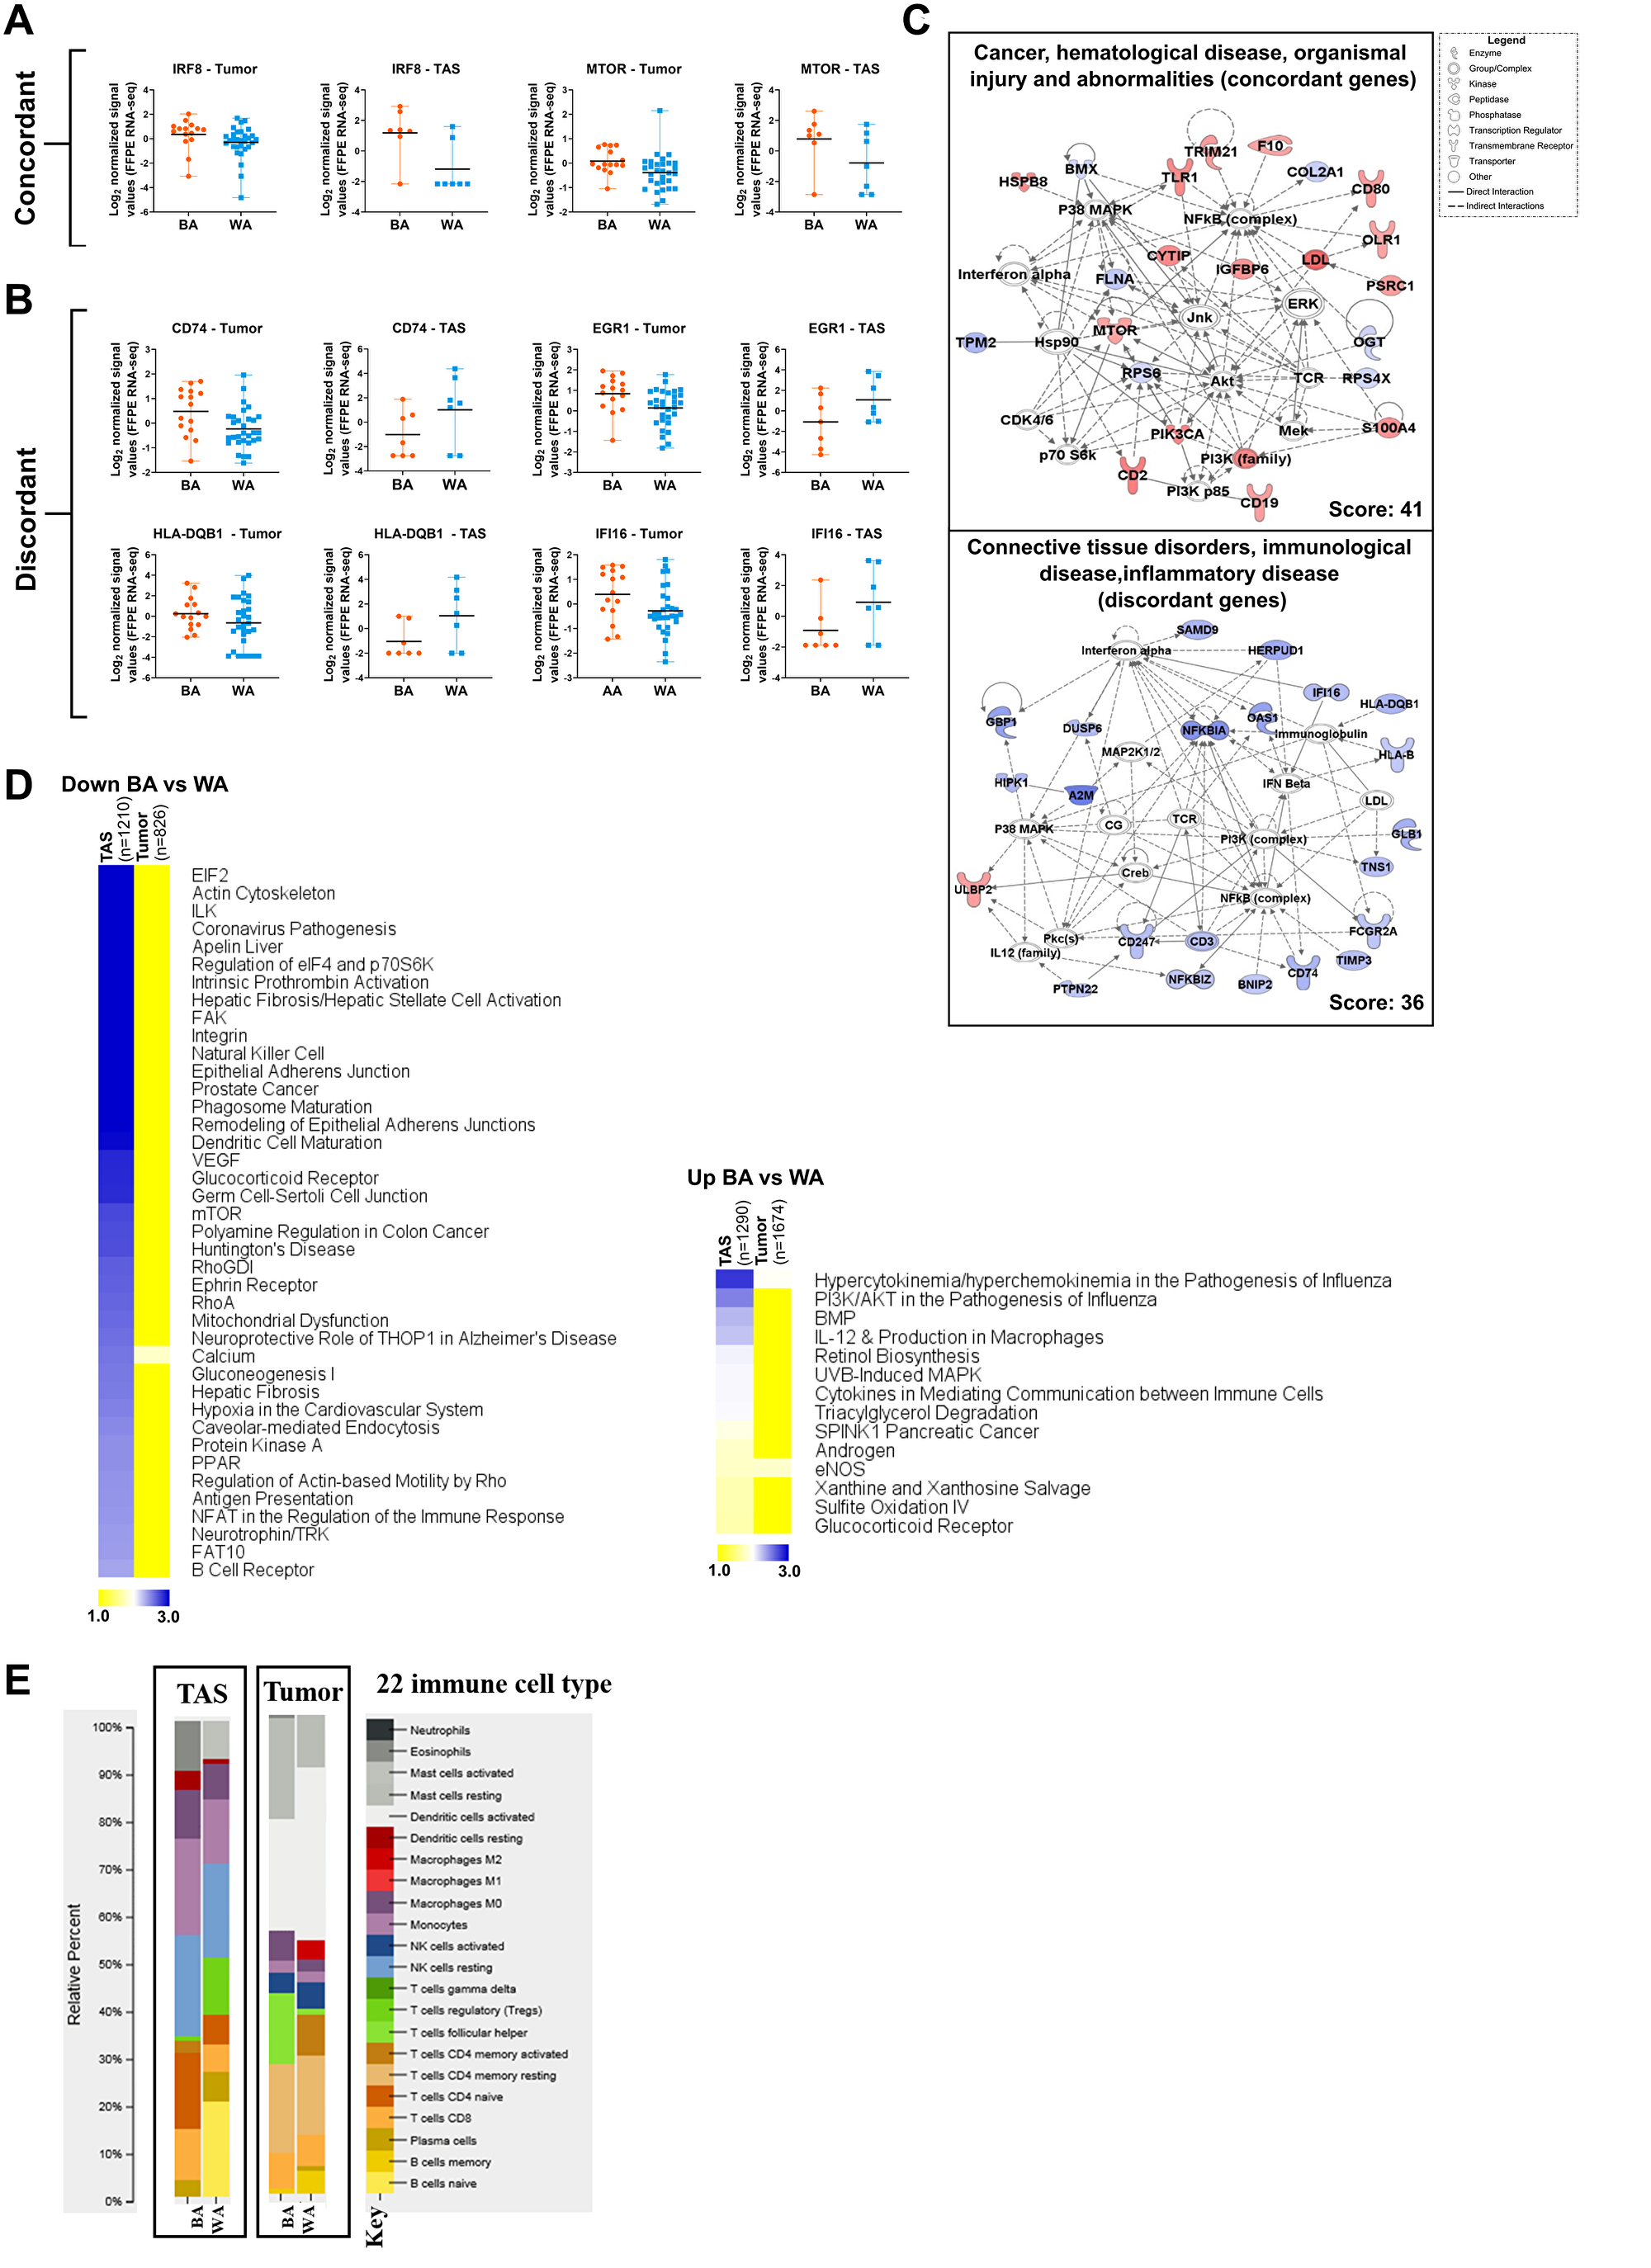 Comparative pathway analysis of significantly differentially expressed genes in BA versus WA PCa patients in tumor and tumor-adjacent stroma (TAS).